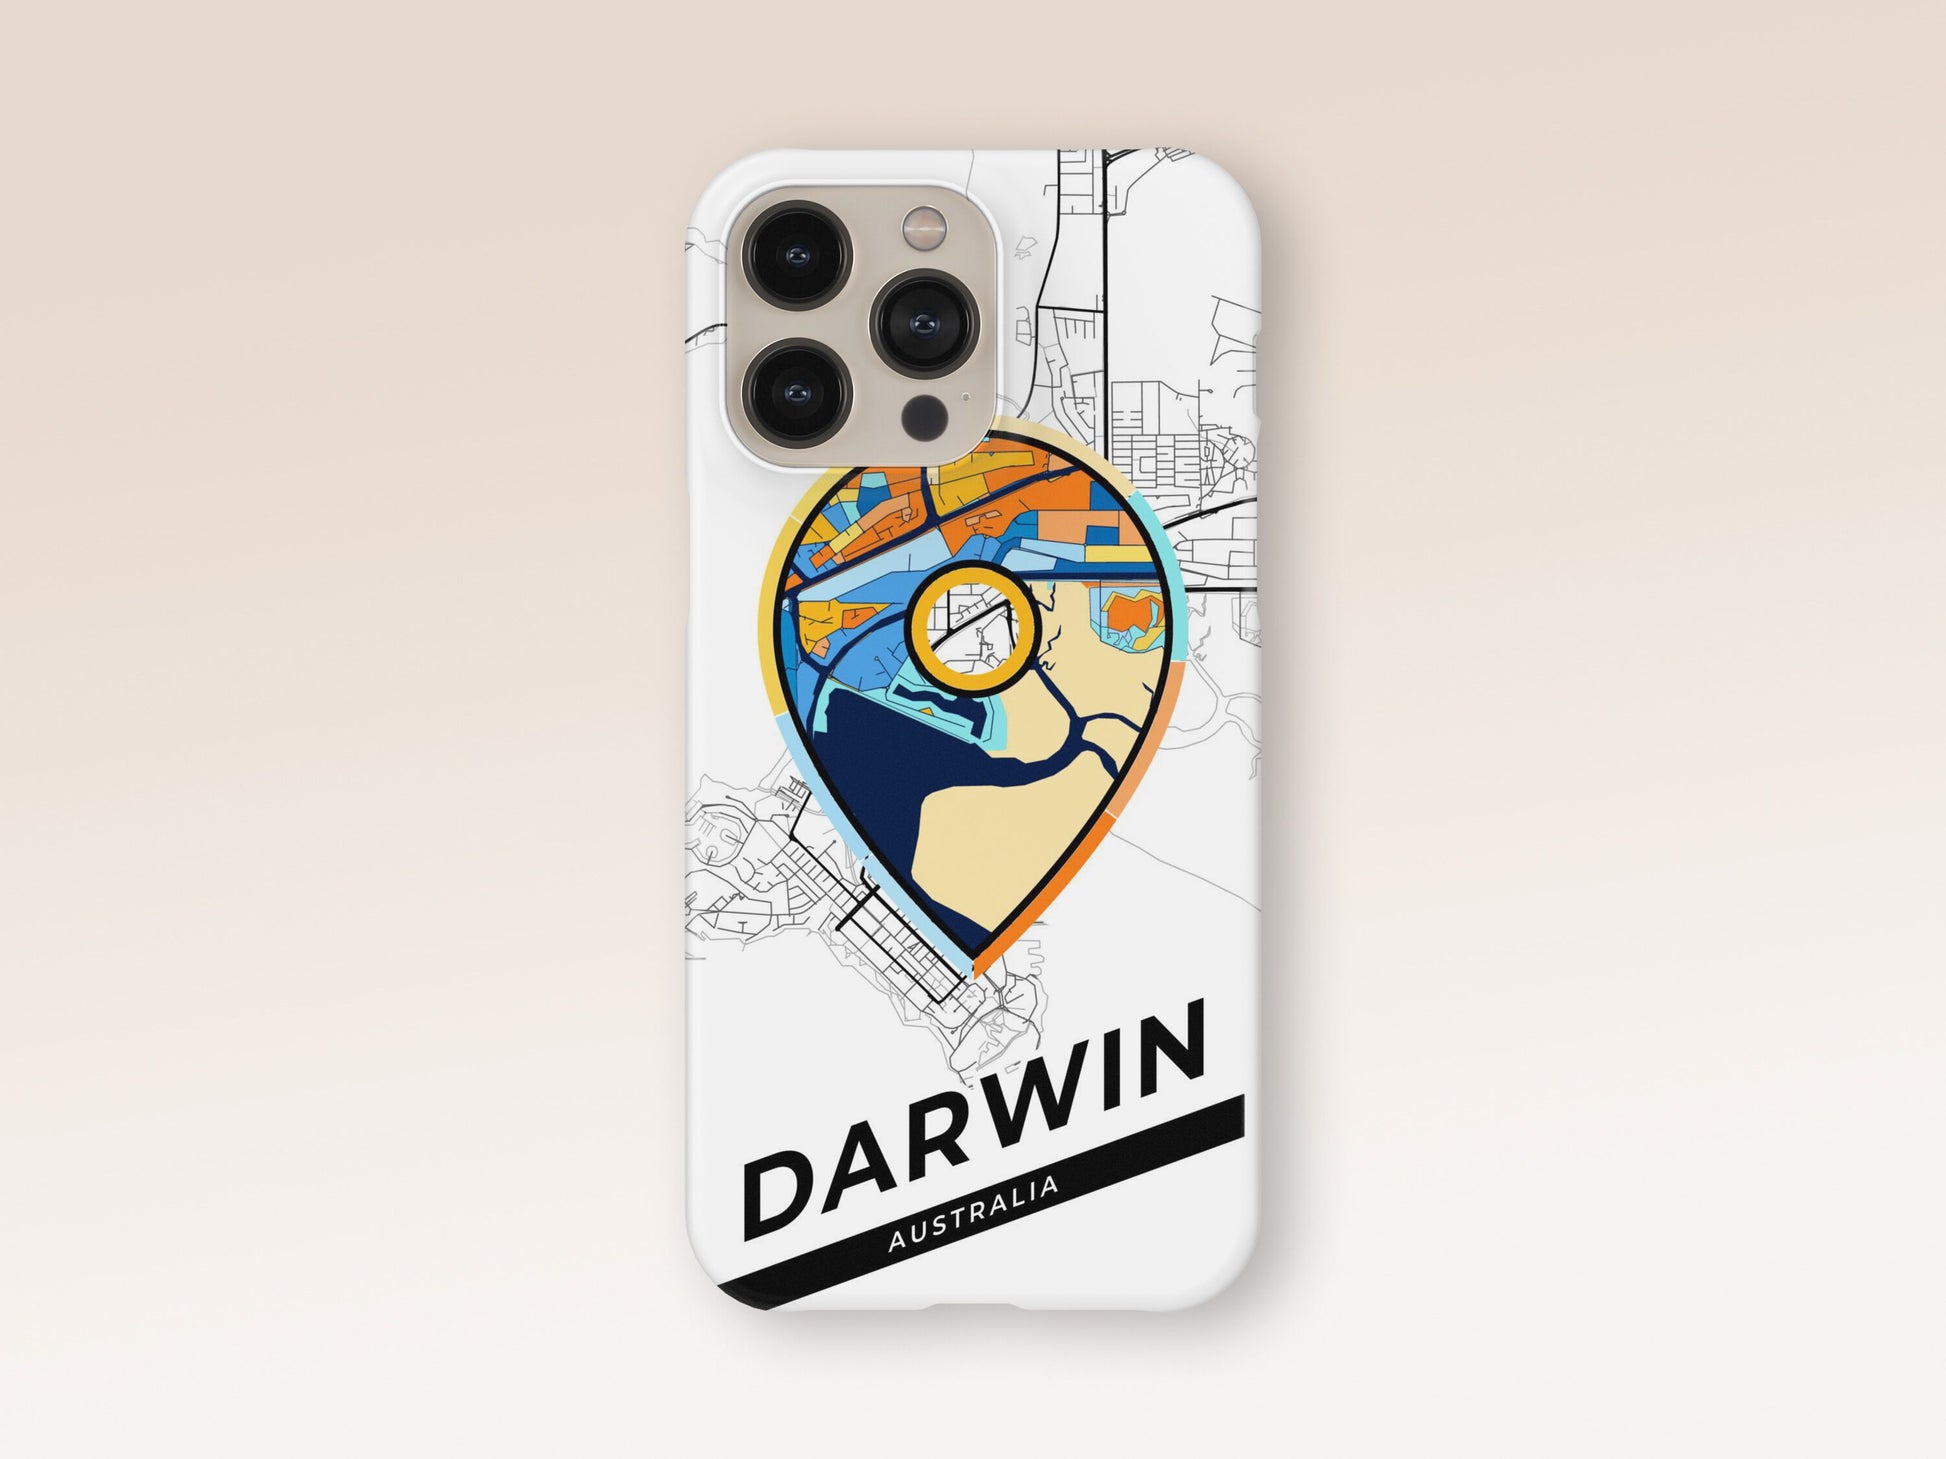 Darwin Australia slim phone case with colorful icon. Birthday, wedding or housewarming gift. Couple match cases. 1